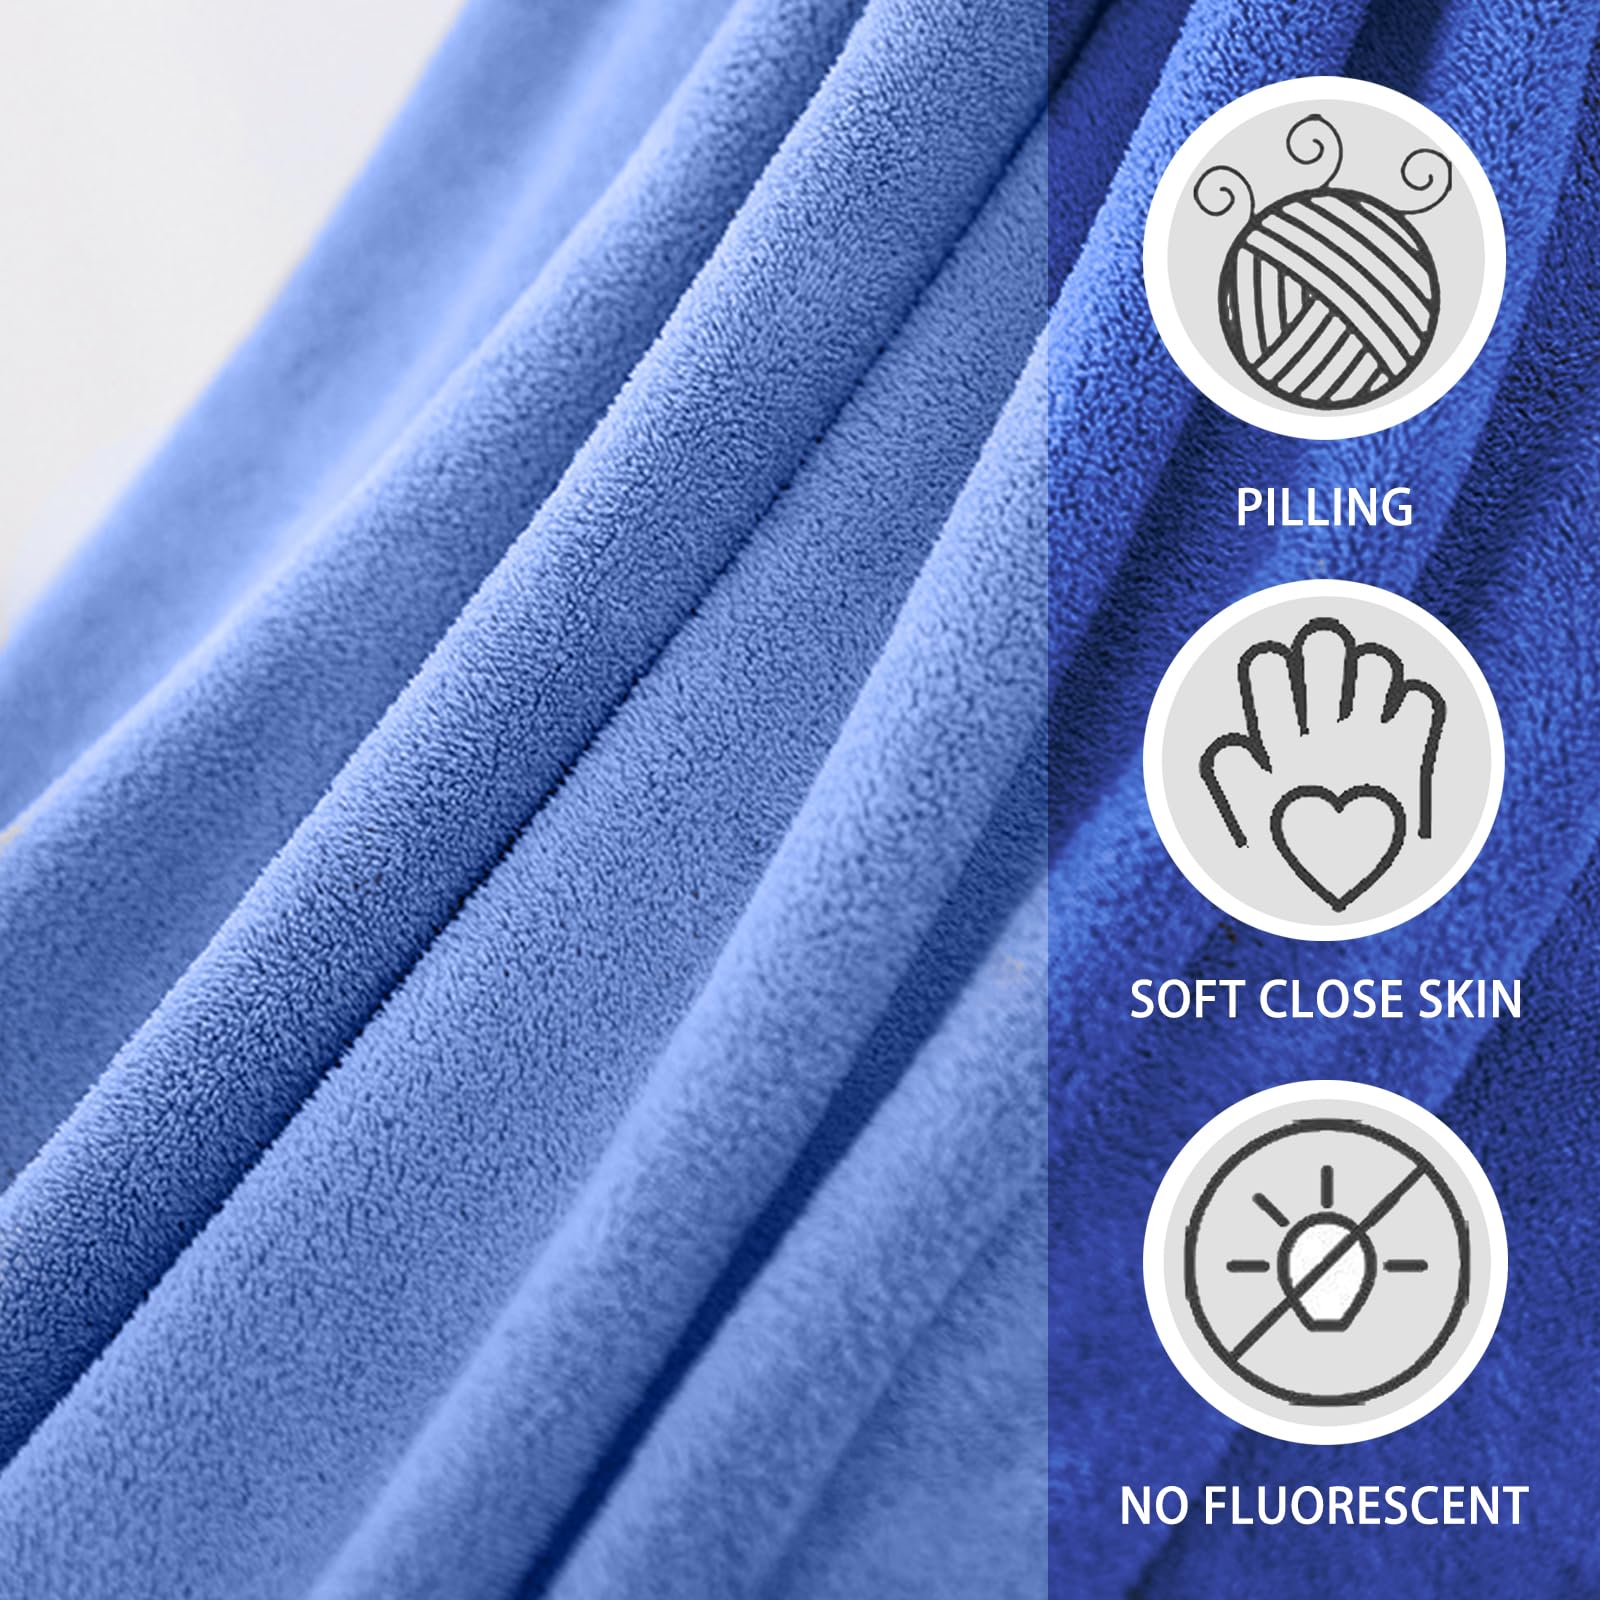 NEYLIM Luxurious Jumbo Bath Sheet,35x70 inches Extra Large Bath Towel Sheets, Quicker to Dry, Super Absorbent, Oversized BathBathroom Towels, Will not Fade and Drop Hairs(Pack of 2) (Blue Bath Towel)